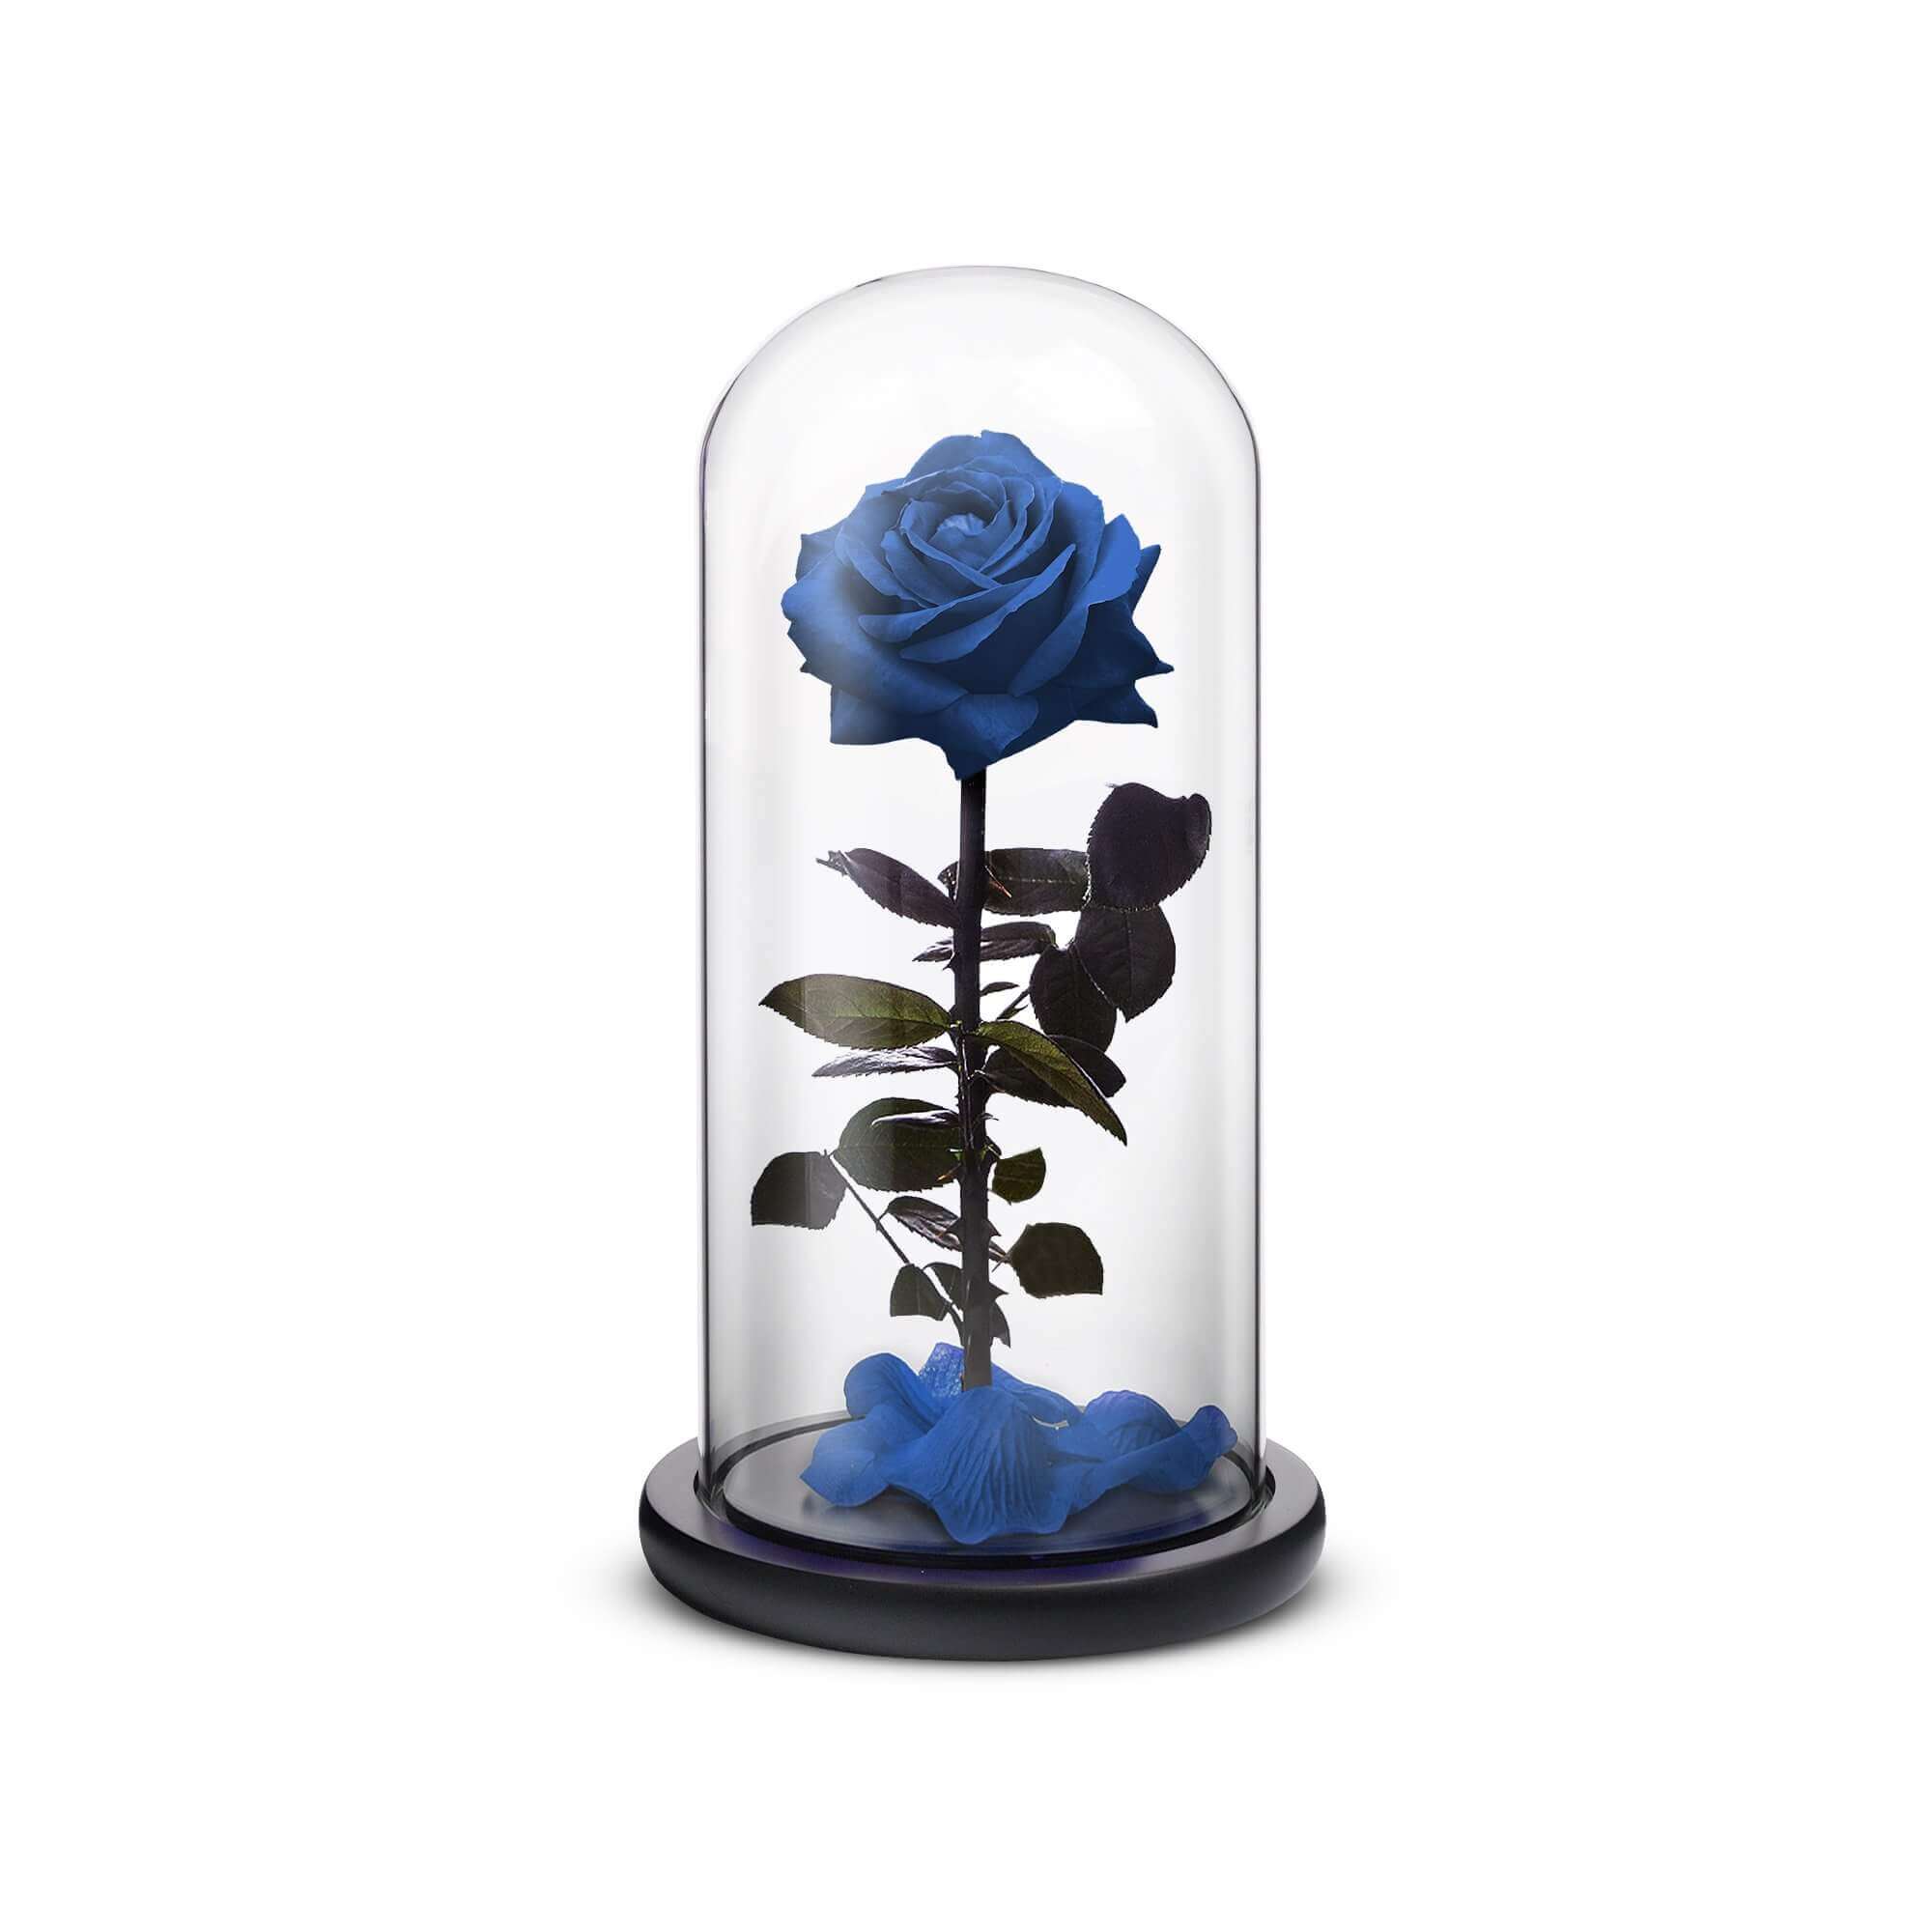 Blue Smoke - Preserved and everlasting flowers – Office Flower